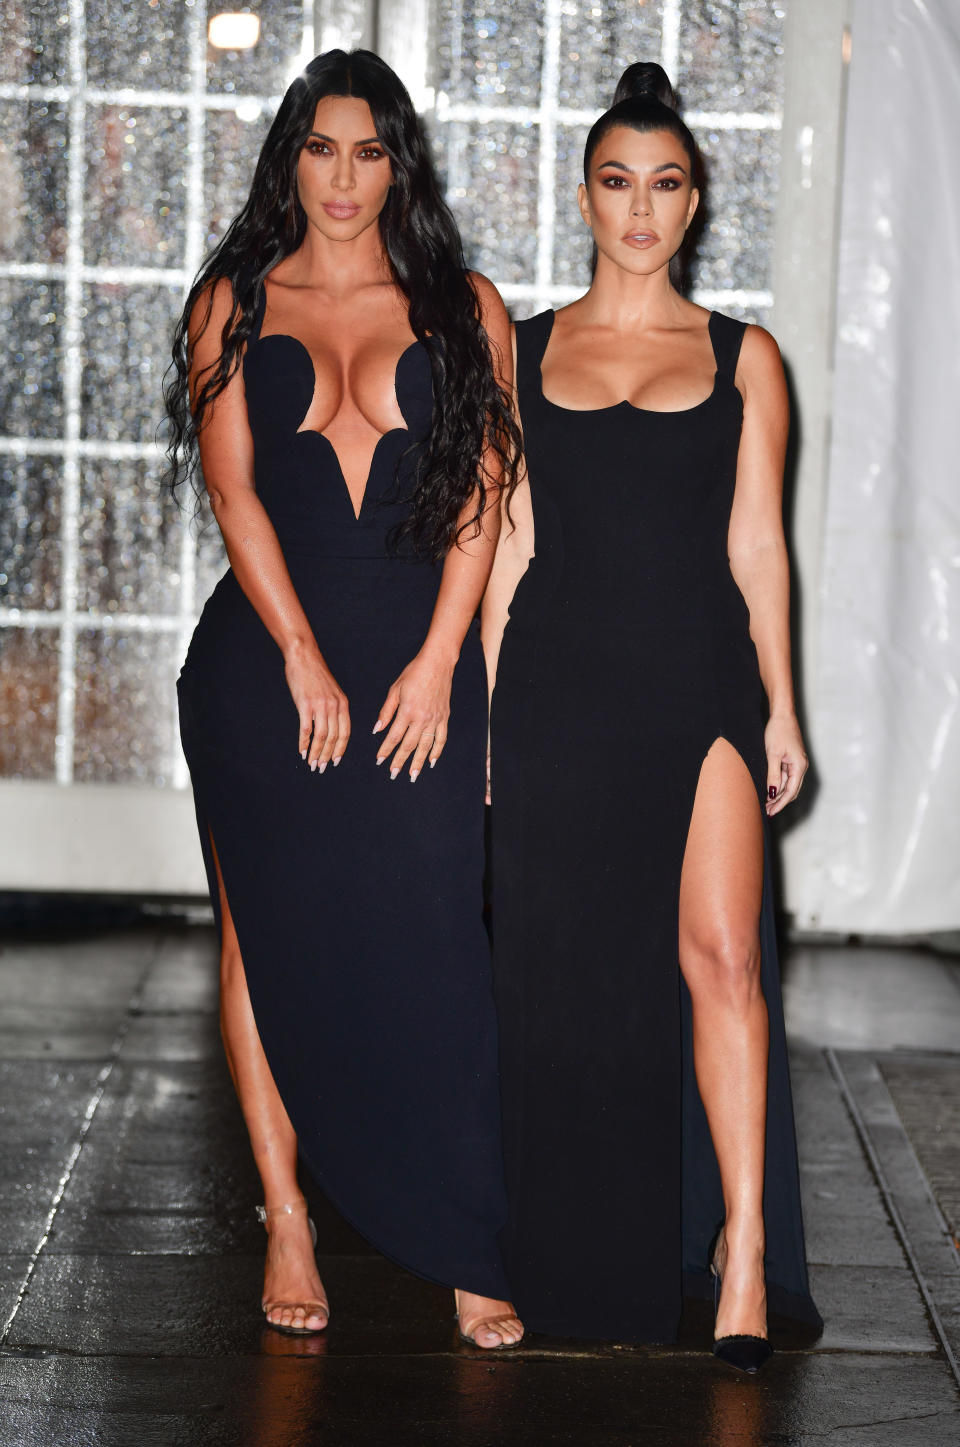 Kim Kardashian wore a revealing Versace gown on the 2019 amfAR red carpet in New York City. Photo: Getty Images